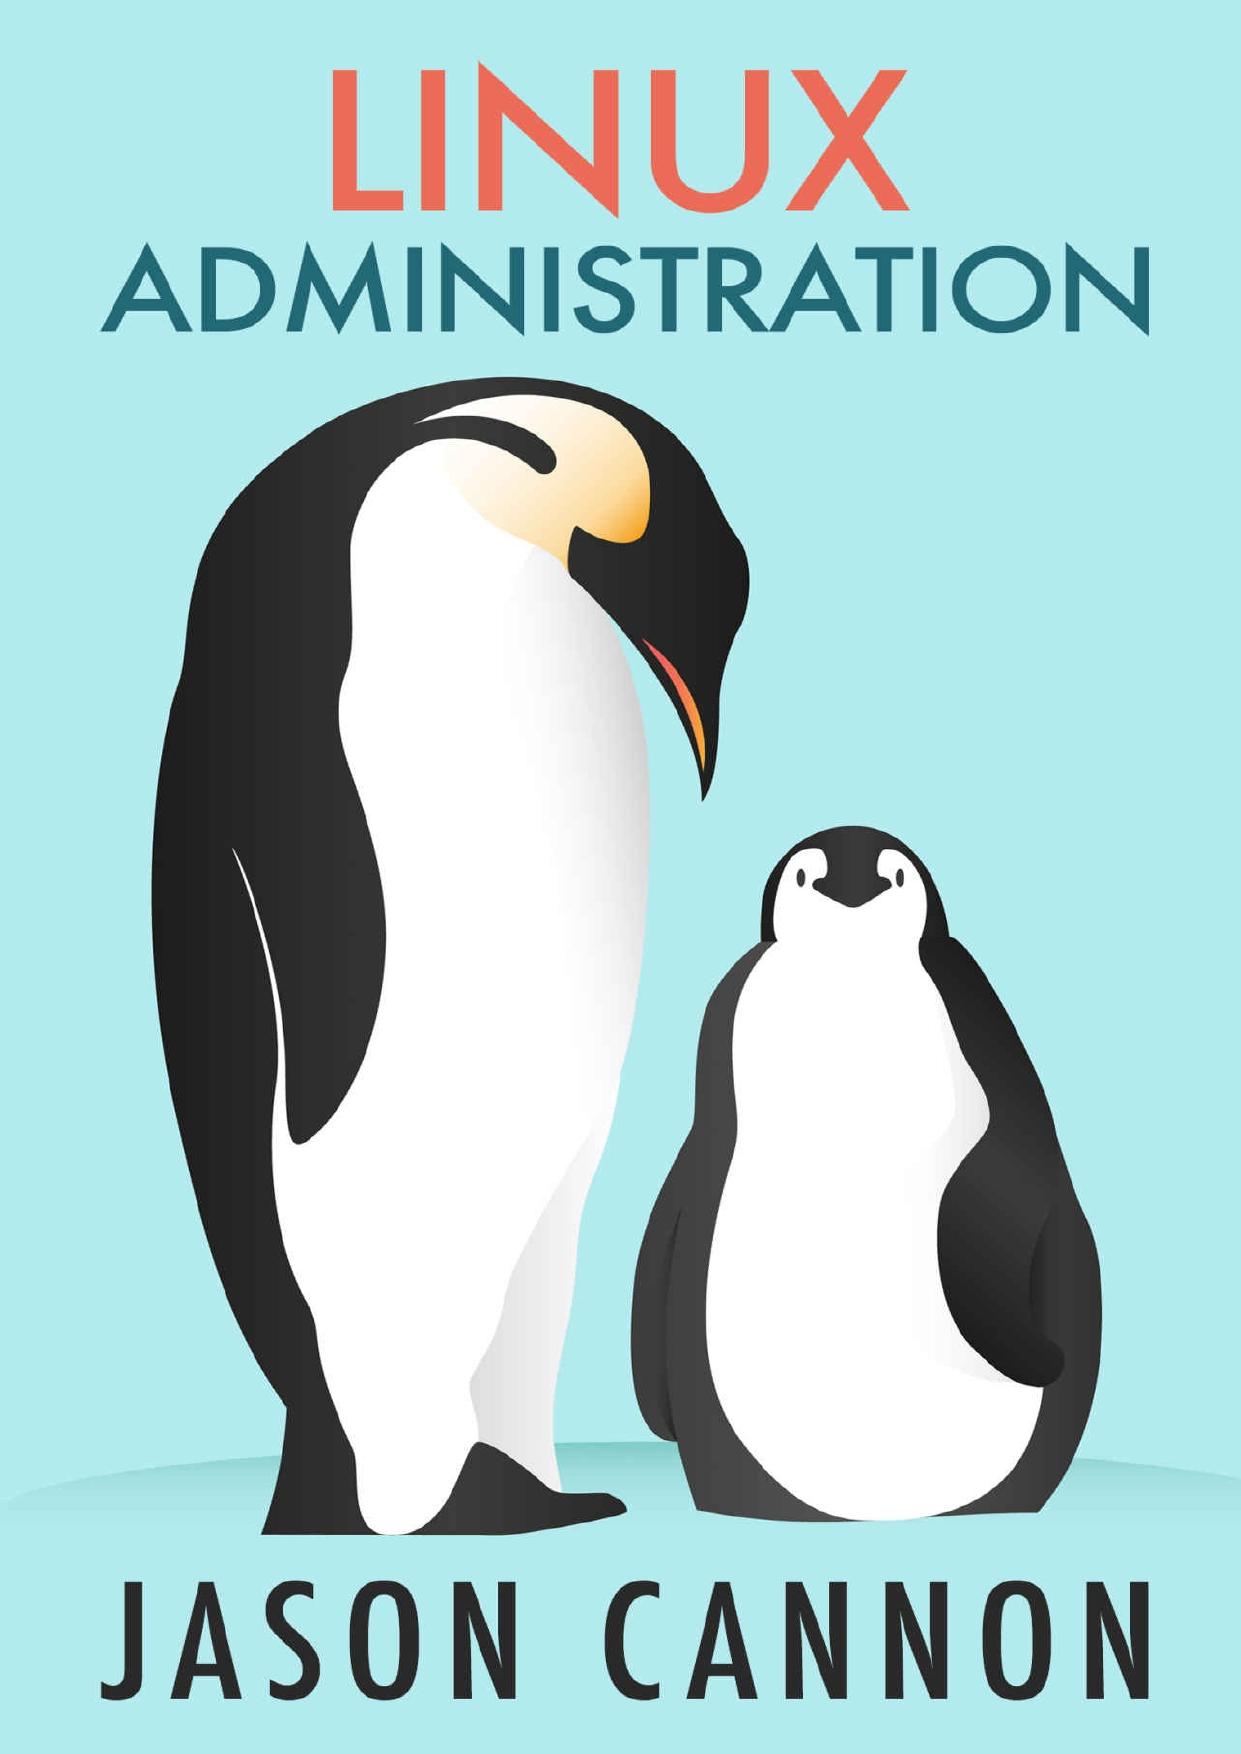 Linux Administration: The Linux Operating System and Command Line Guide for Linux Administrators by Jason Cannon